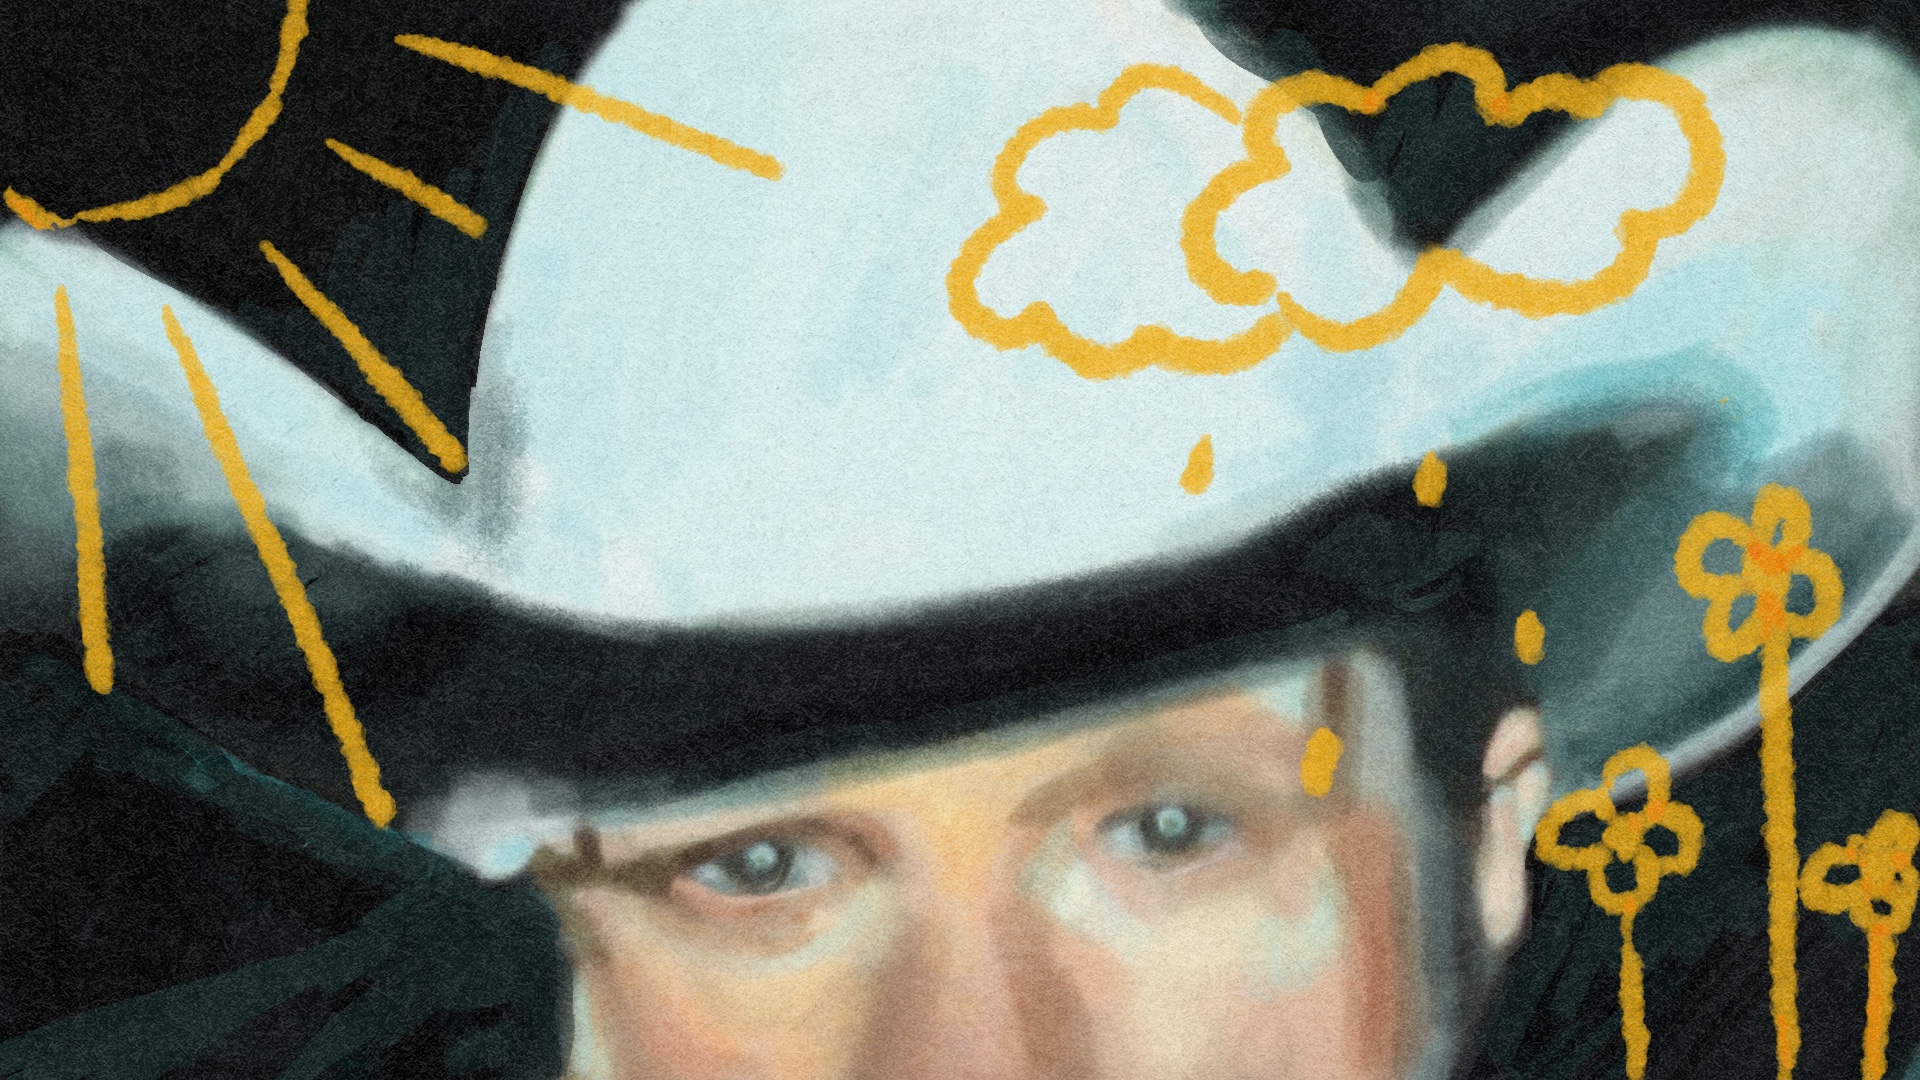 Drawing of “Bright Future” album cover of Adrianne Lenker in a cowboy hat with yellow drawings of sun and clouds.